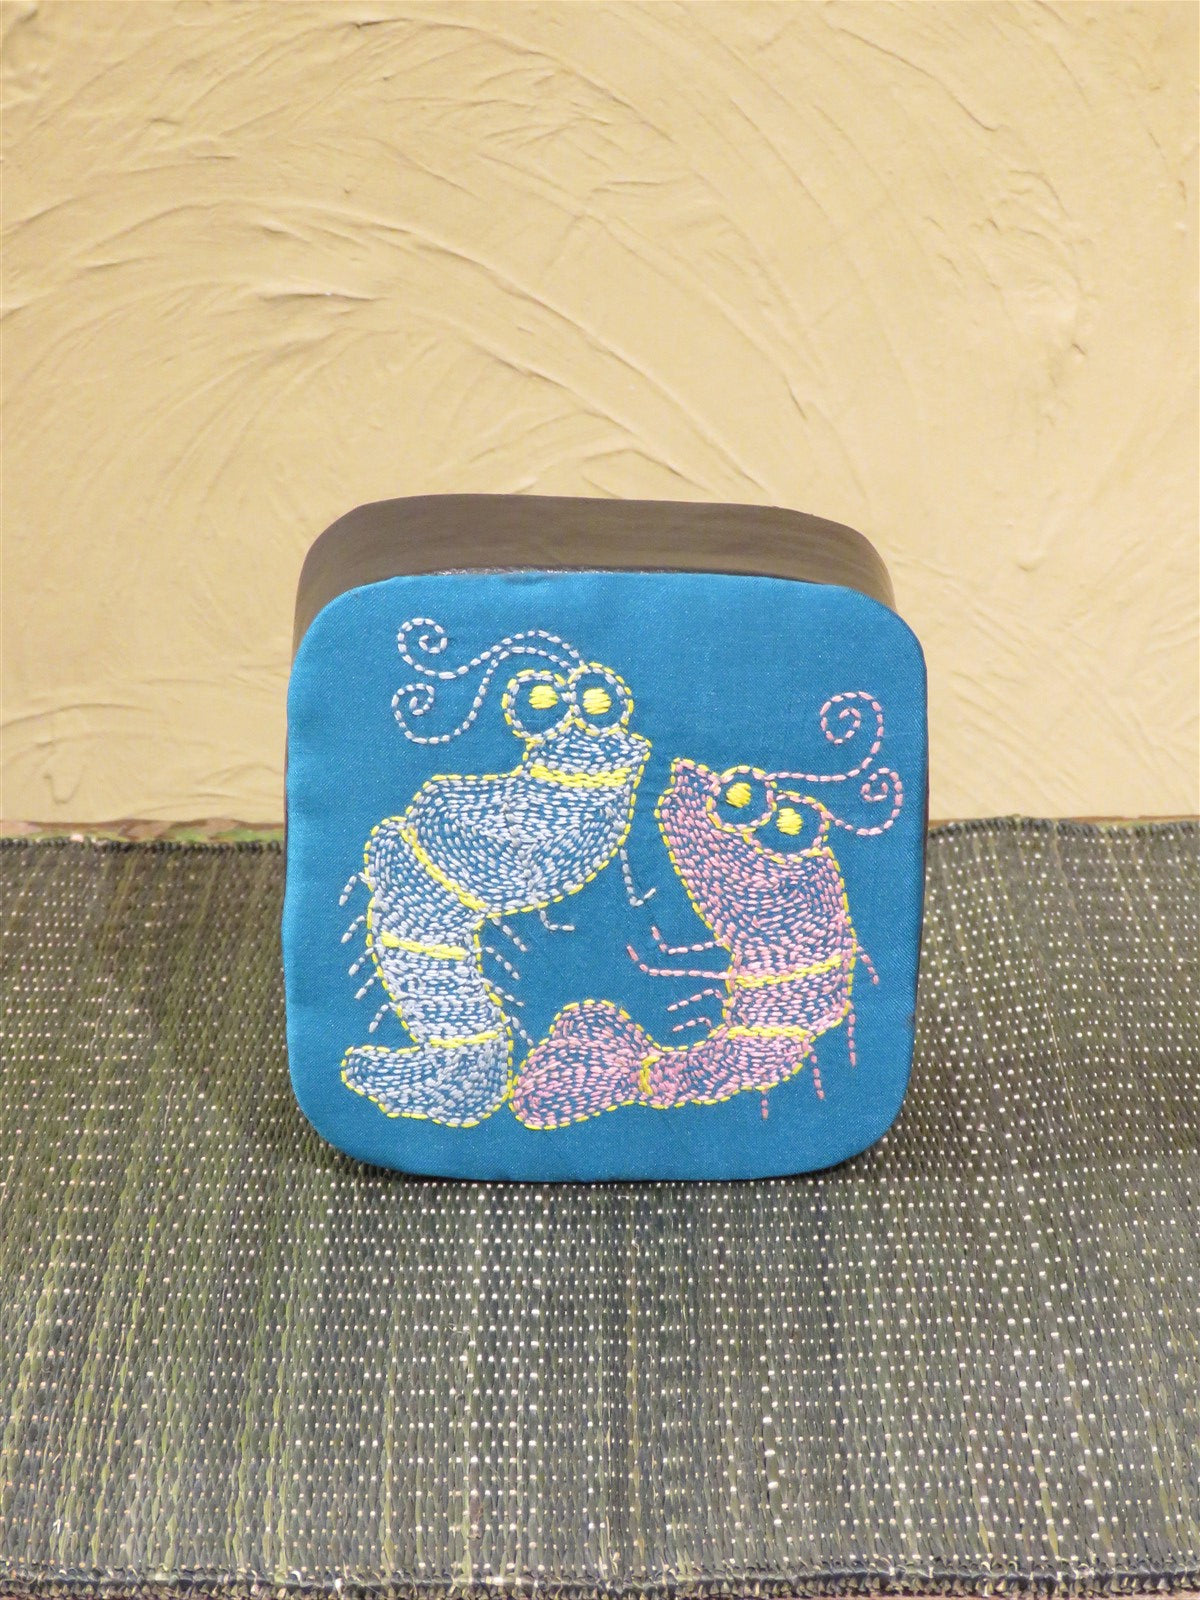 Green Handcrafted Kantha Embroidery Square Utility Box